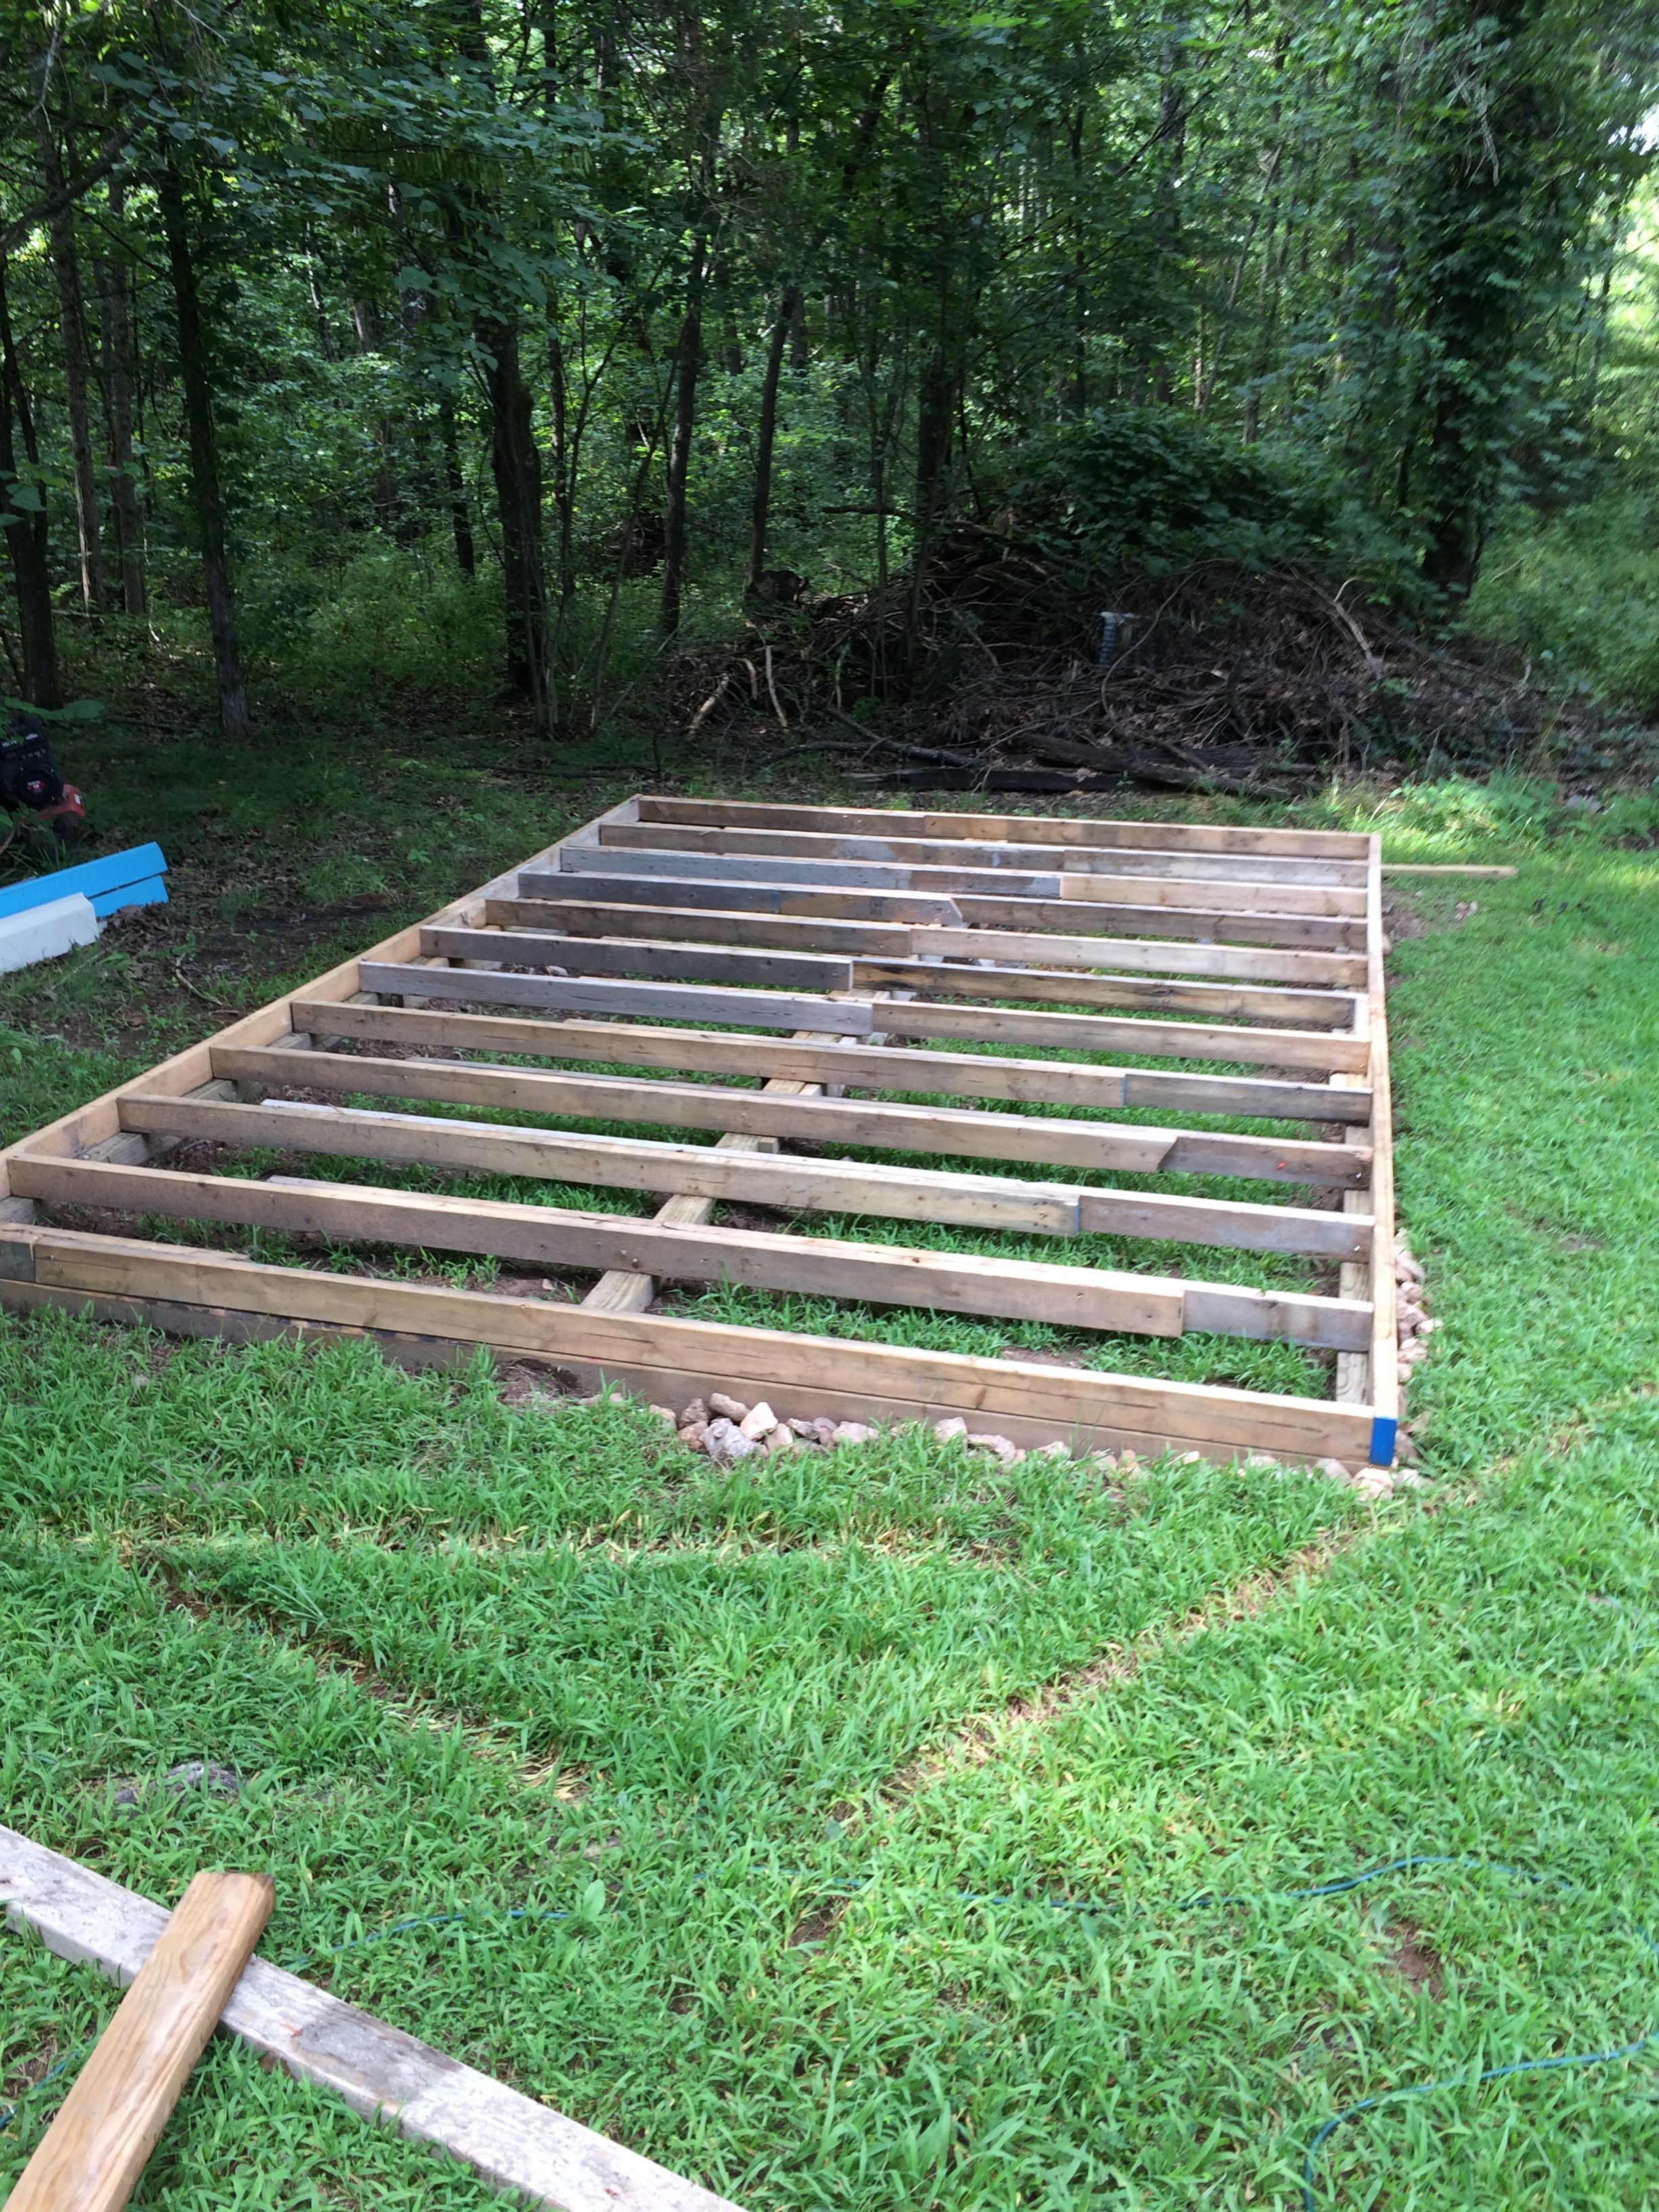 Used 2x4's for the rim and floor joists. Spaced out the joists 16" on center.